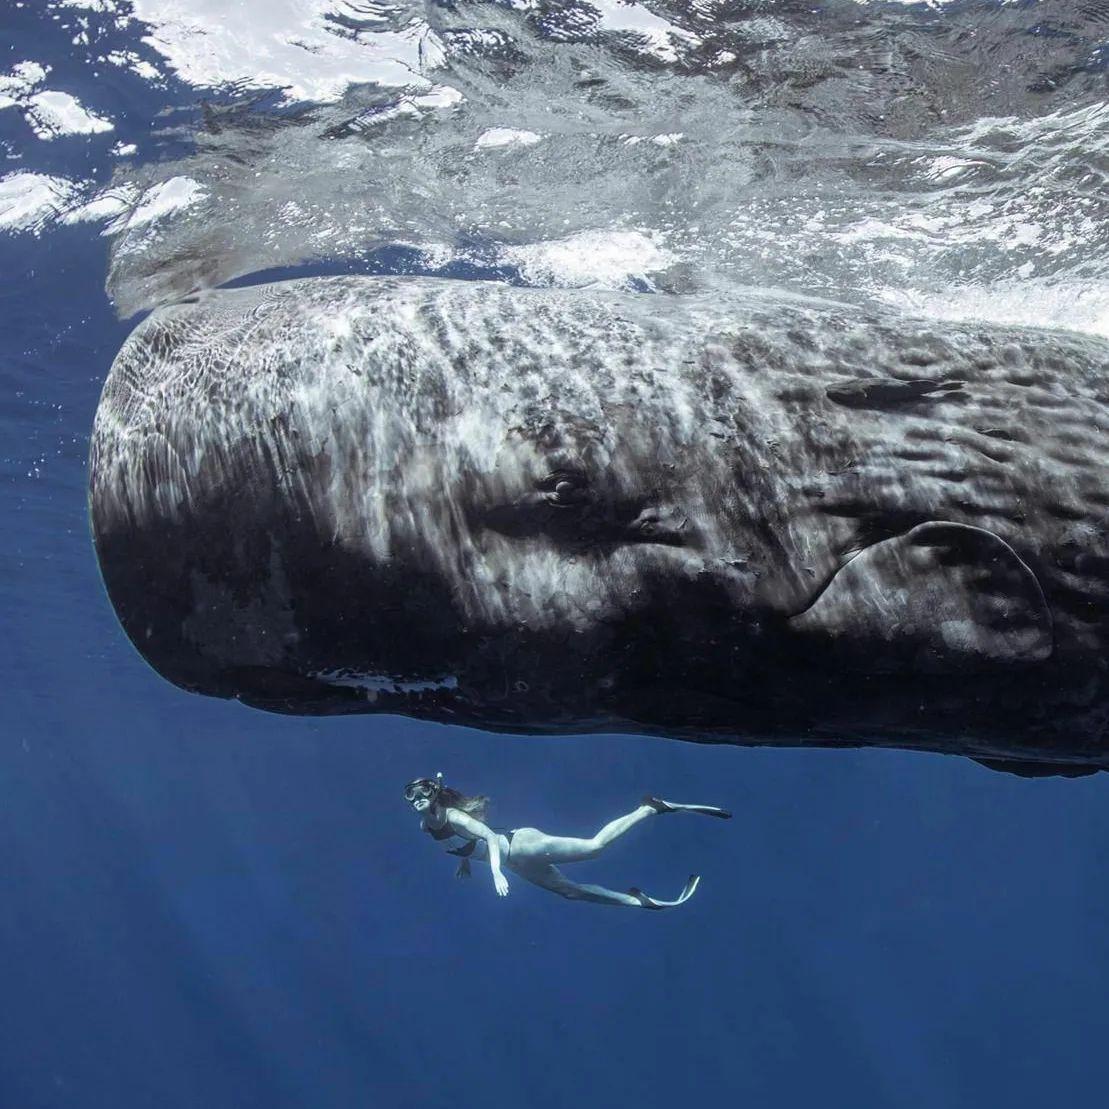 A sperm whale swims over a diver. (Courtesy of <a href="https://www.instagram.com/mike_korostelev/">Mikhail Korostelev</a>)